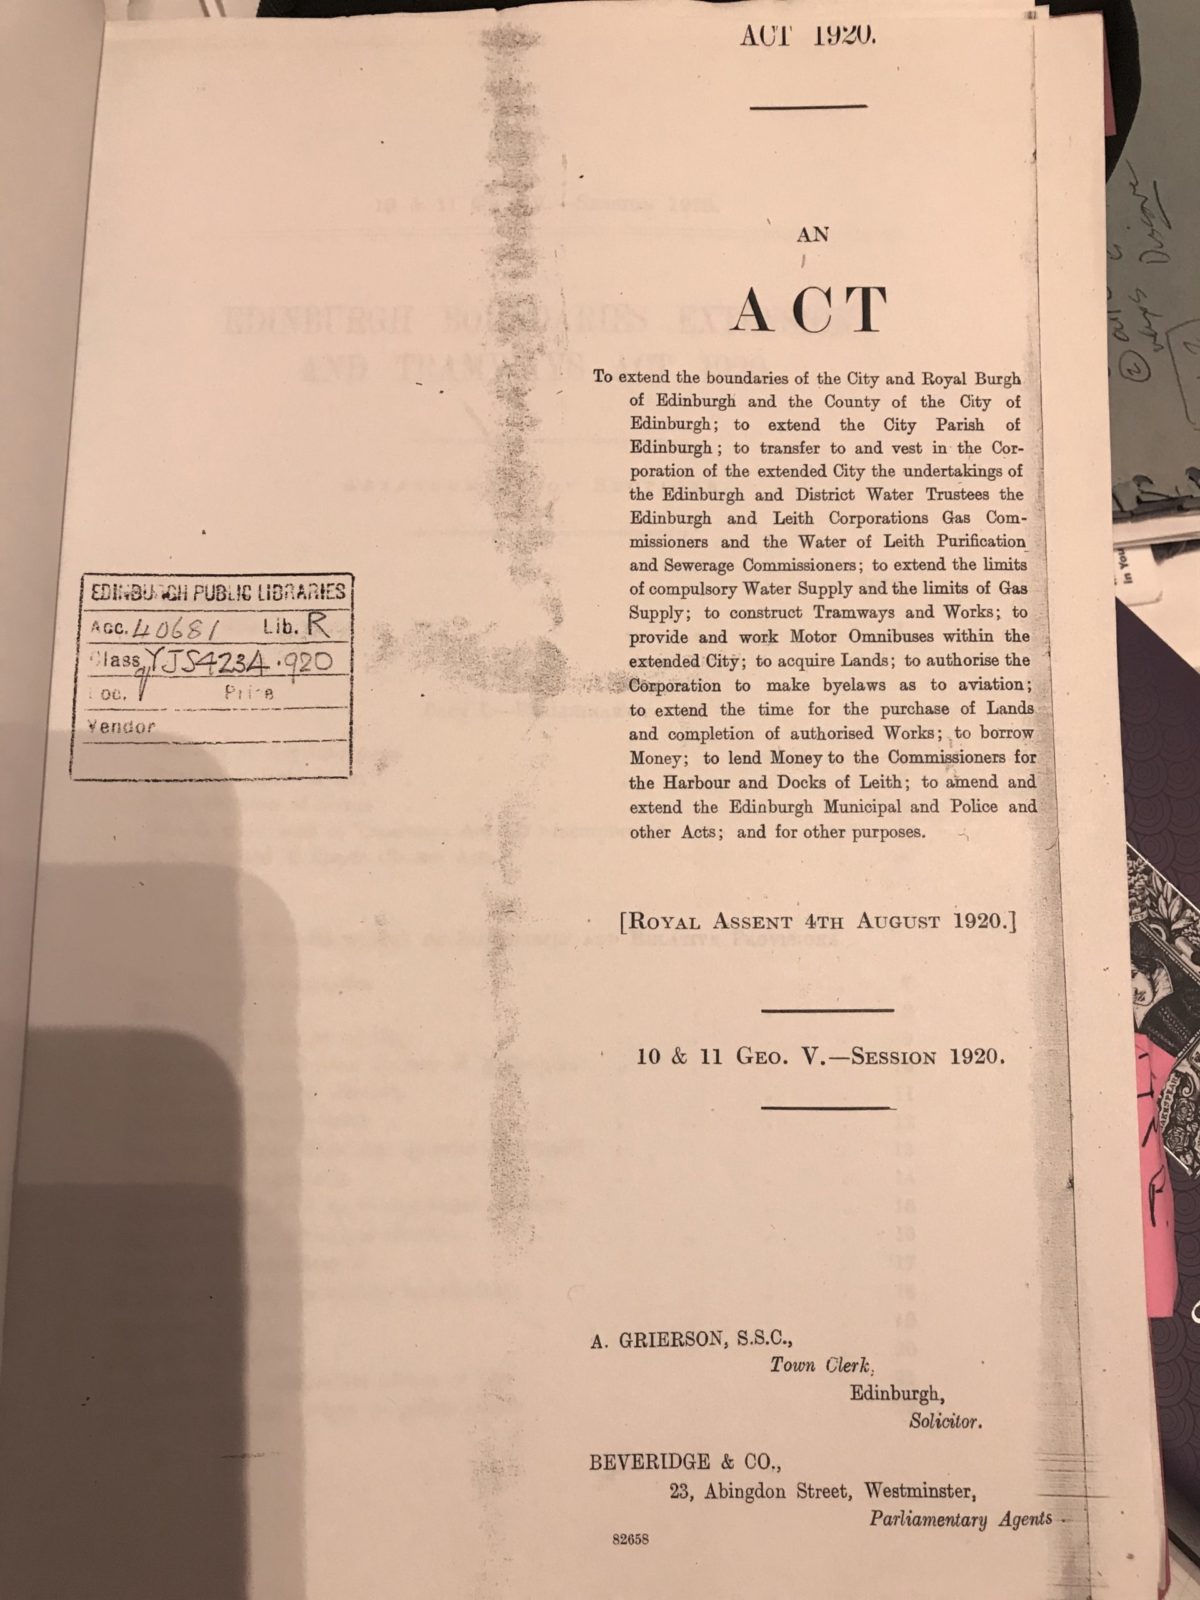 "The Dirty Deed" - The Act of Amalgamation 1920